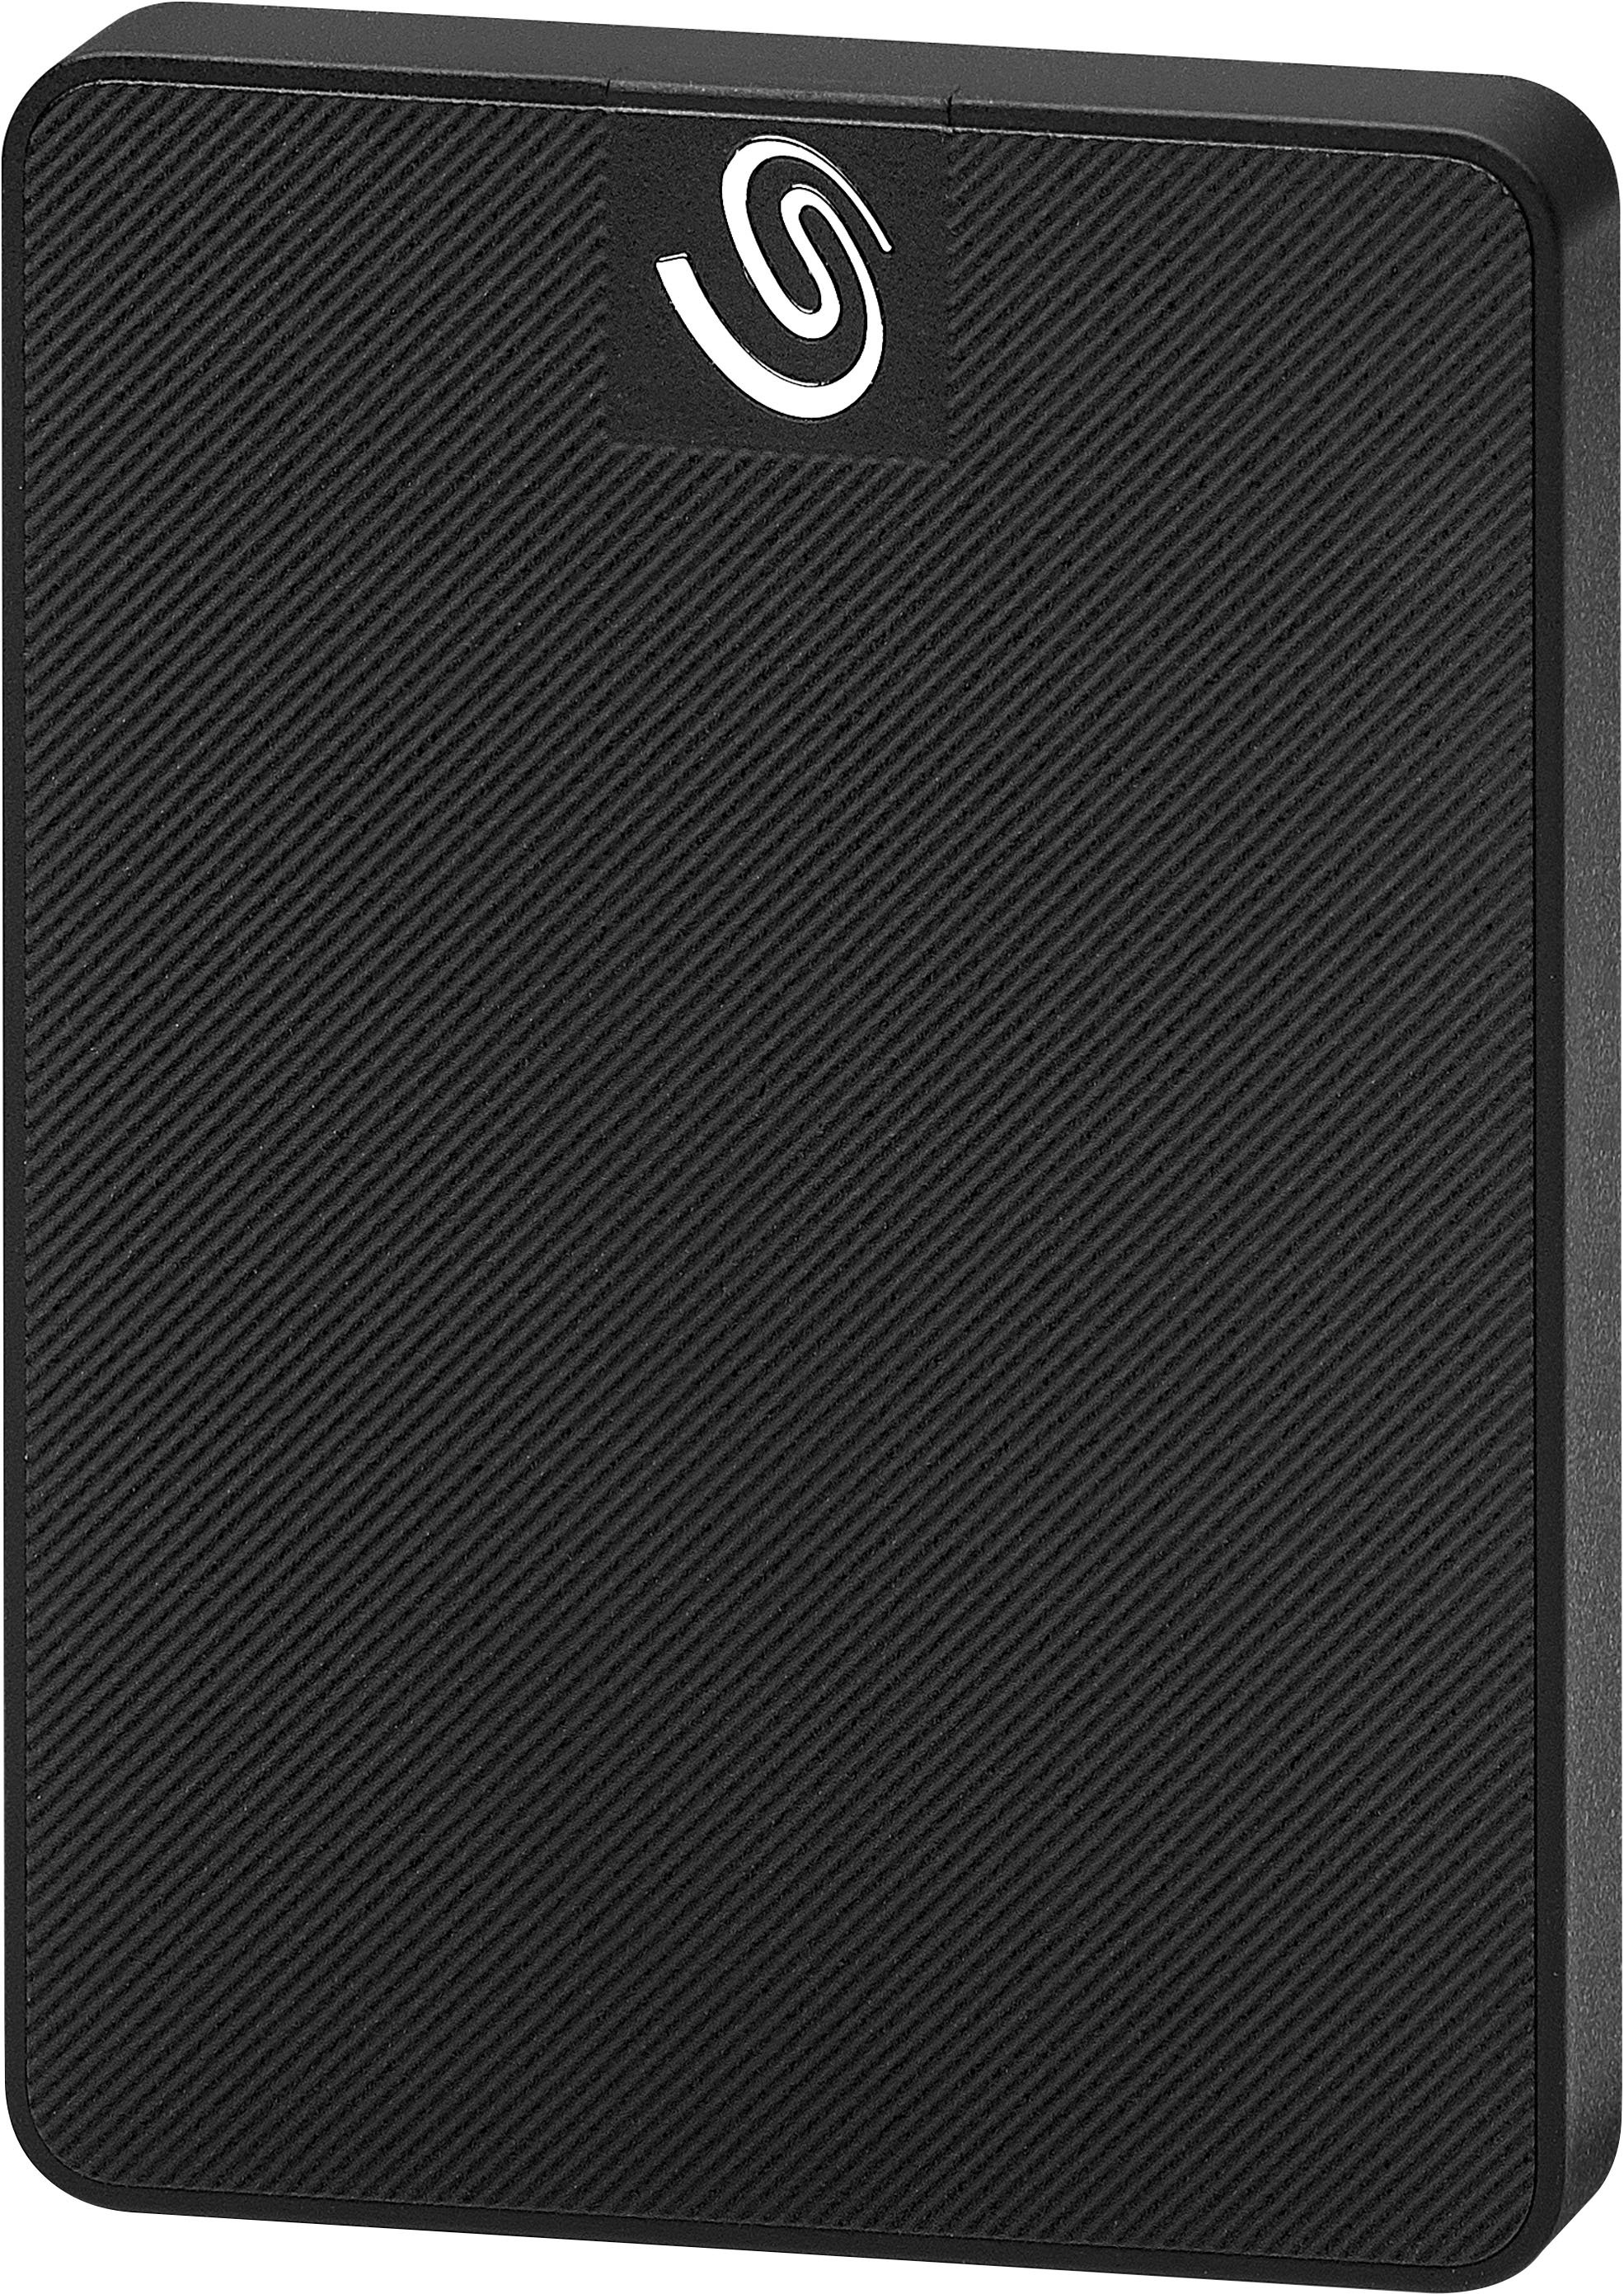 Angle View: Seagate - Expansion 500GB External USB-C and USB 3.0 Portable SSD with Rescue Data Recovery Services